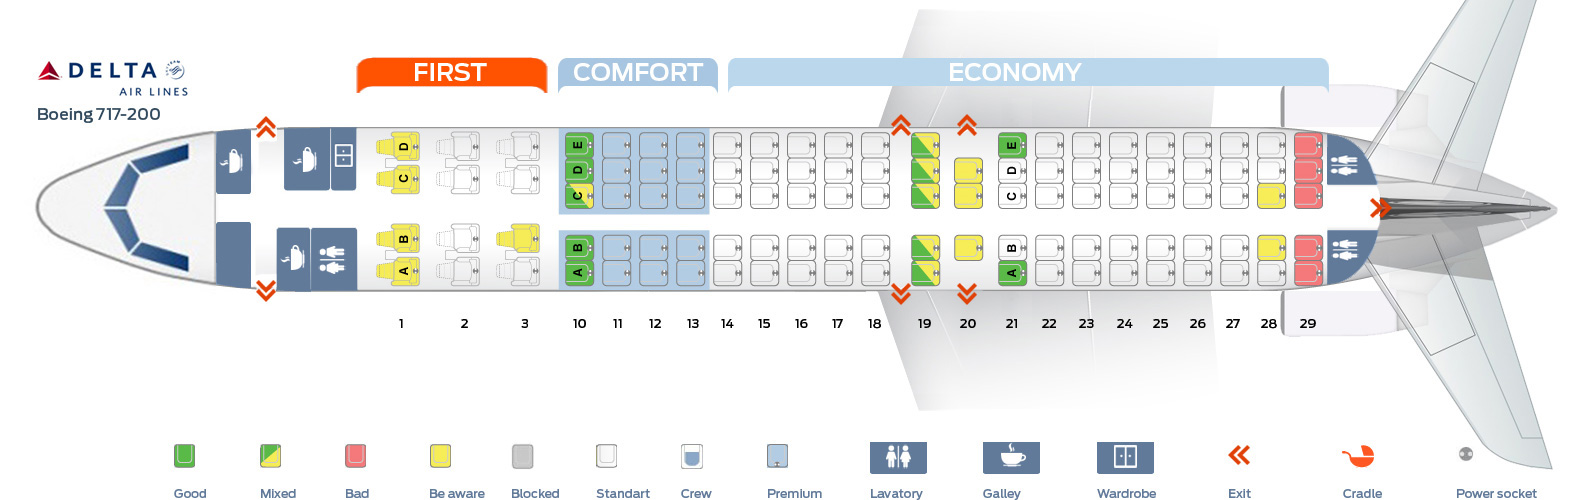 Delta Airlines Flight Seating Chart